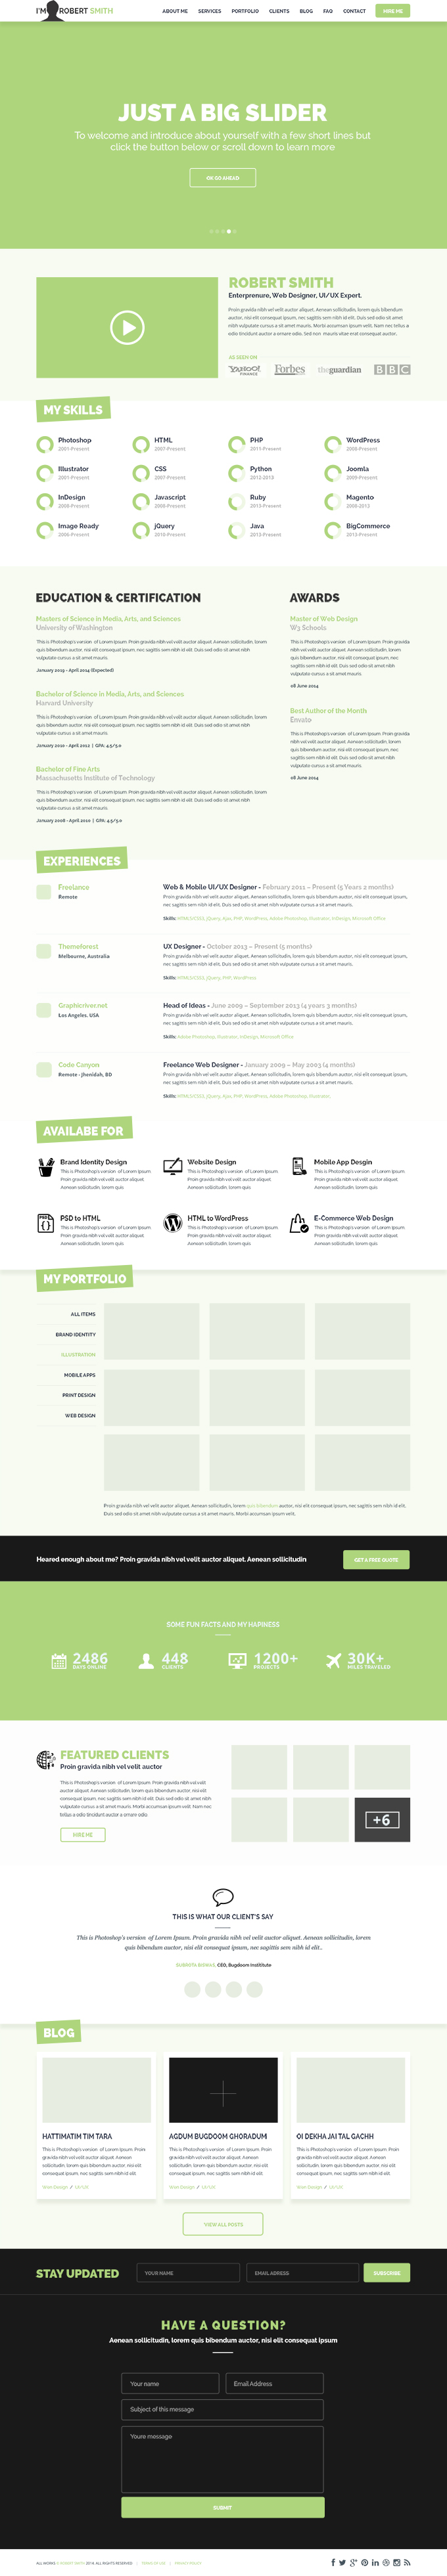 Free PSD: IMX - One Page Resume Website